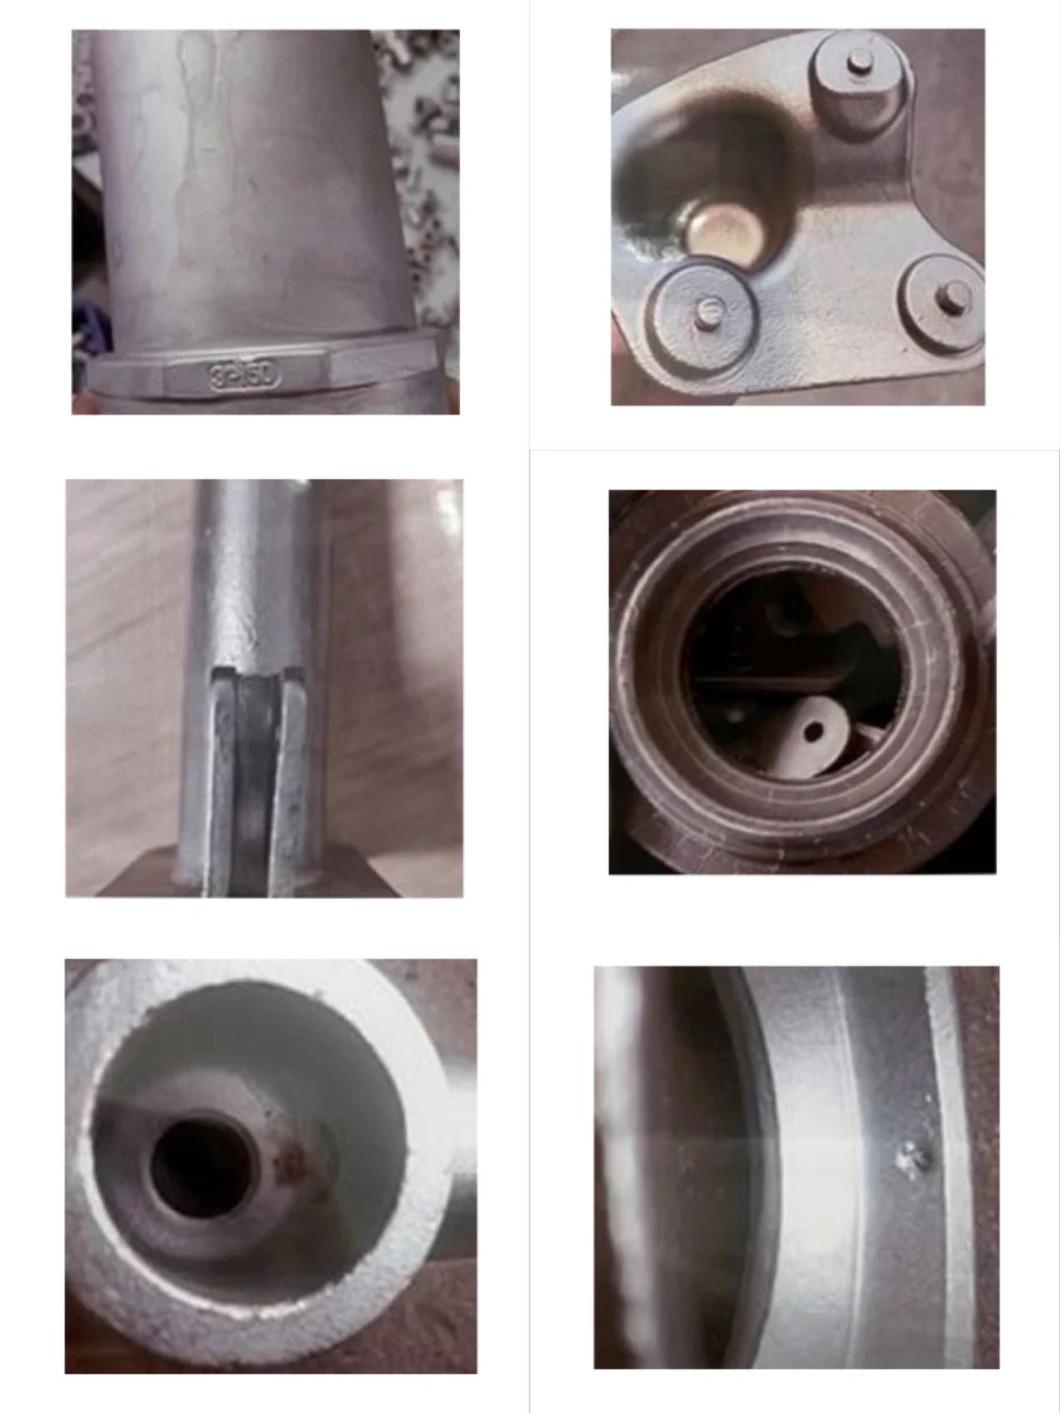 OEM Drawings Stainless Steel Hardware Fastener Clamp Lost Wax Casting Marine Machinery Parts